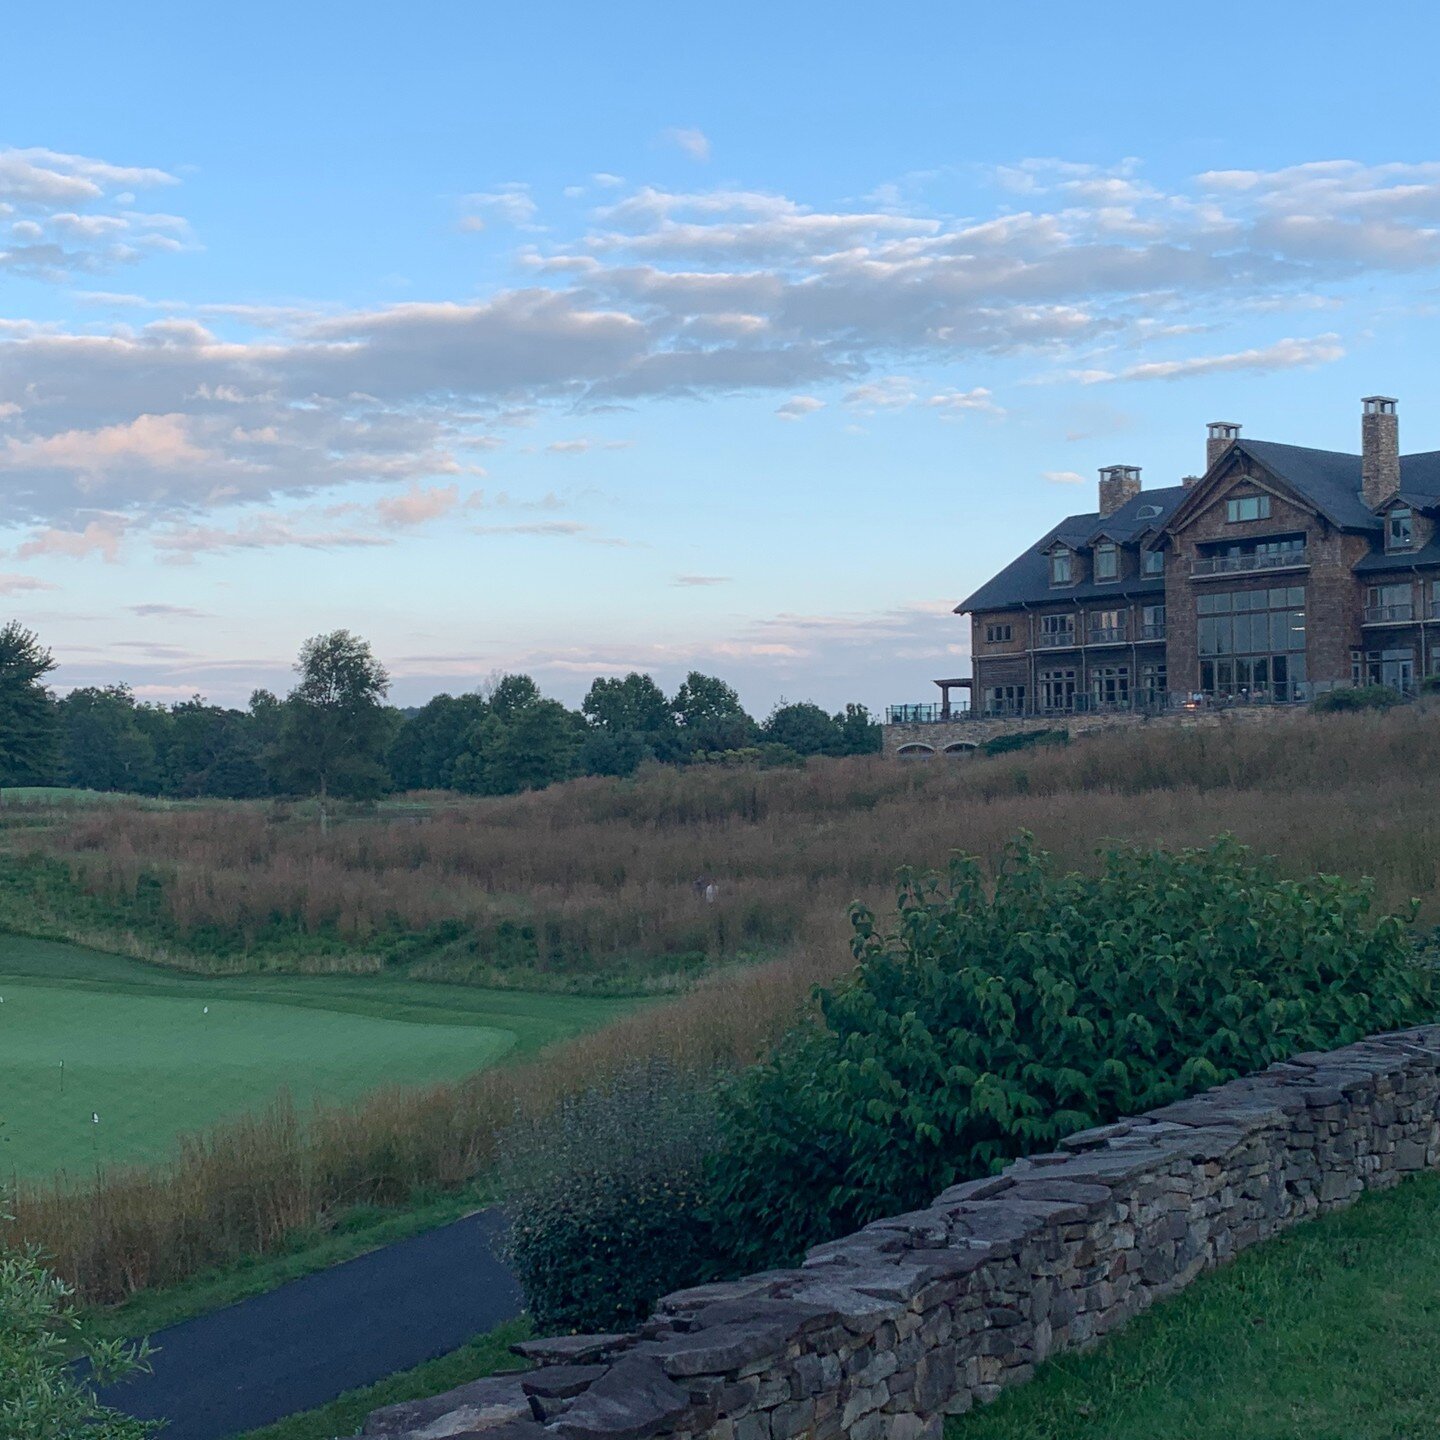 Jared and I just joined a group of friends at Primland to celebrate a 50th birthday and we had the best time. If you're looking for a mountain escape this fall, I highly recommend checking out this beauty. This Auberge resort sits in the Blue Ridge M